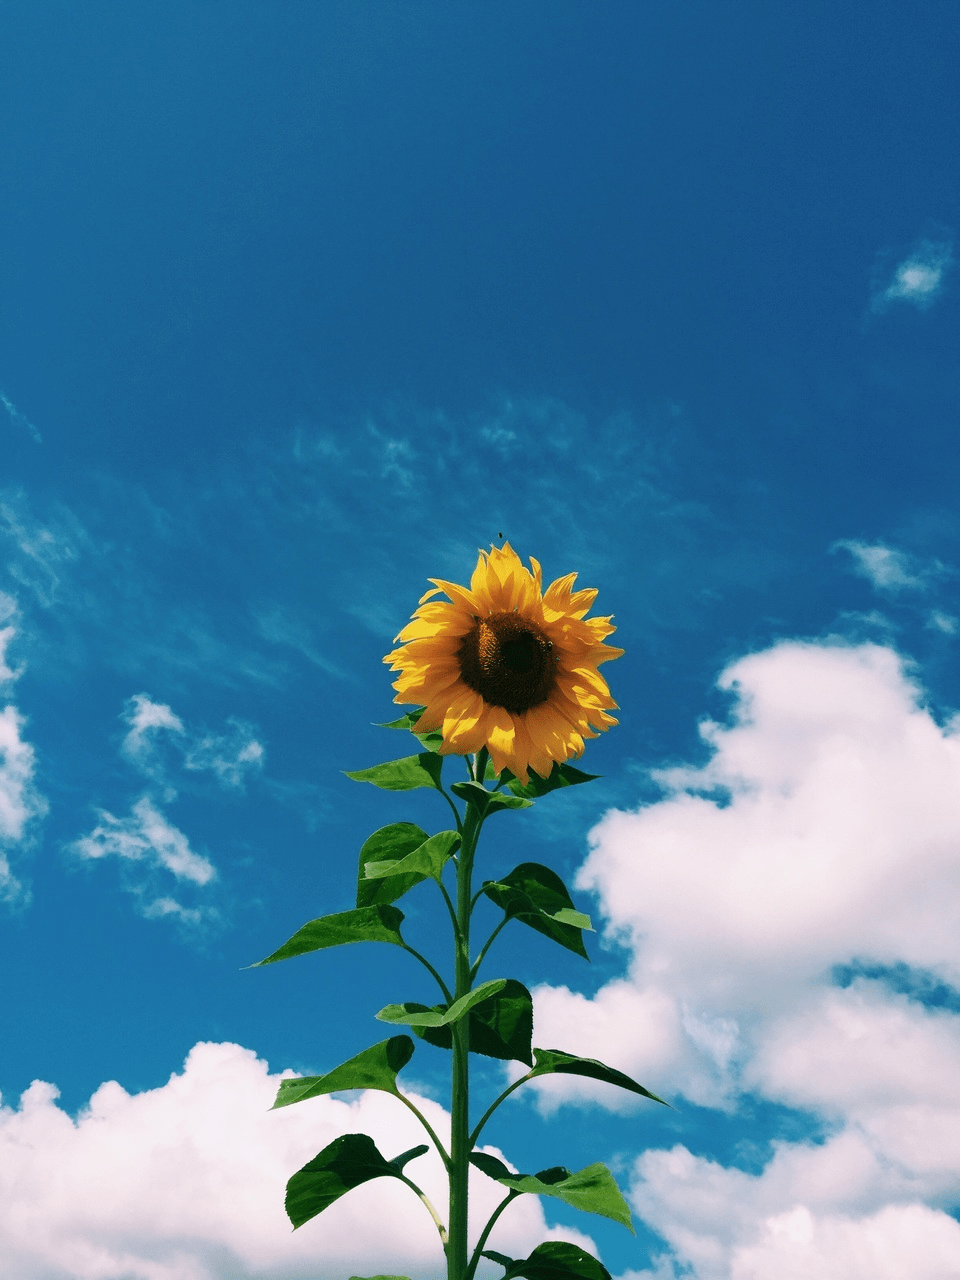 A sunflower is growing in the middle of some clouds - Vintage clouds, sunflower, indie